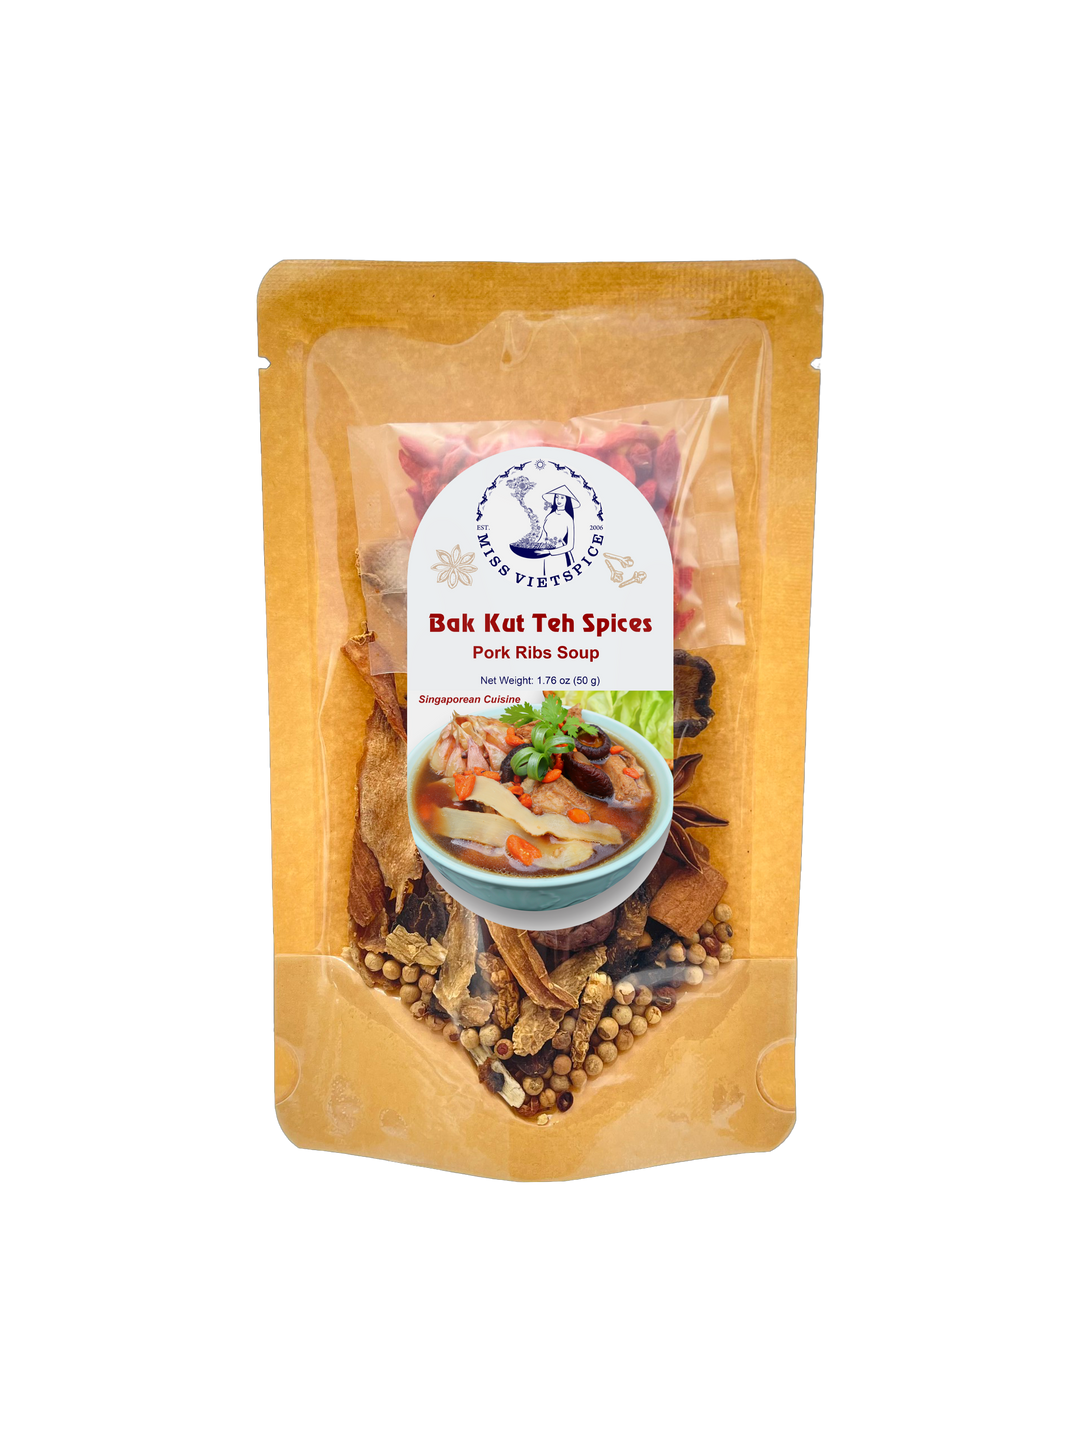 MISS VIETSPICE - 1.76 Oz - 50gr Bak Kut Teh Herbs and Spices, Pack 3 of Malaysia Kee Hiong Klang Soup Spices